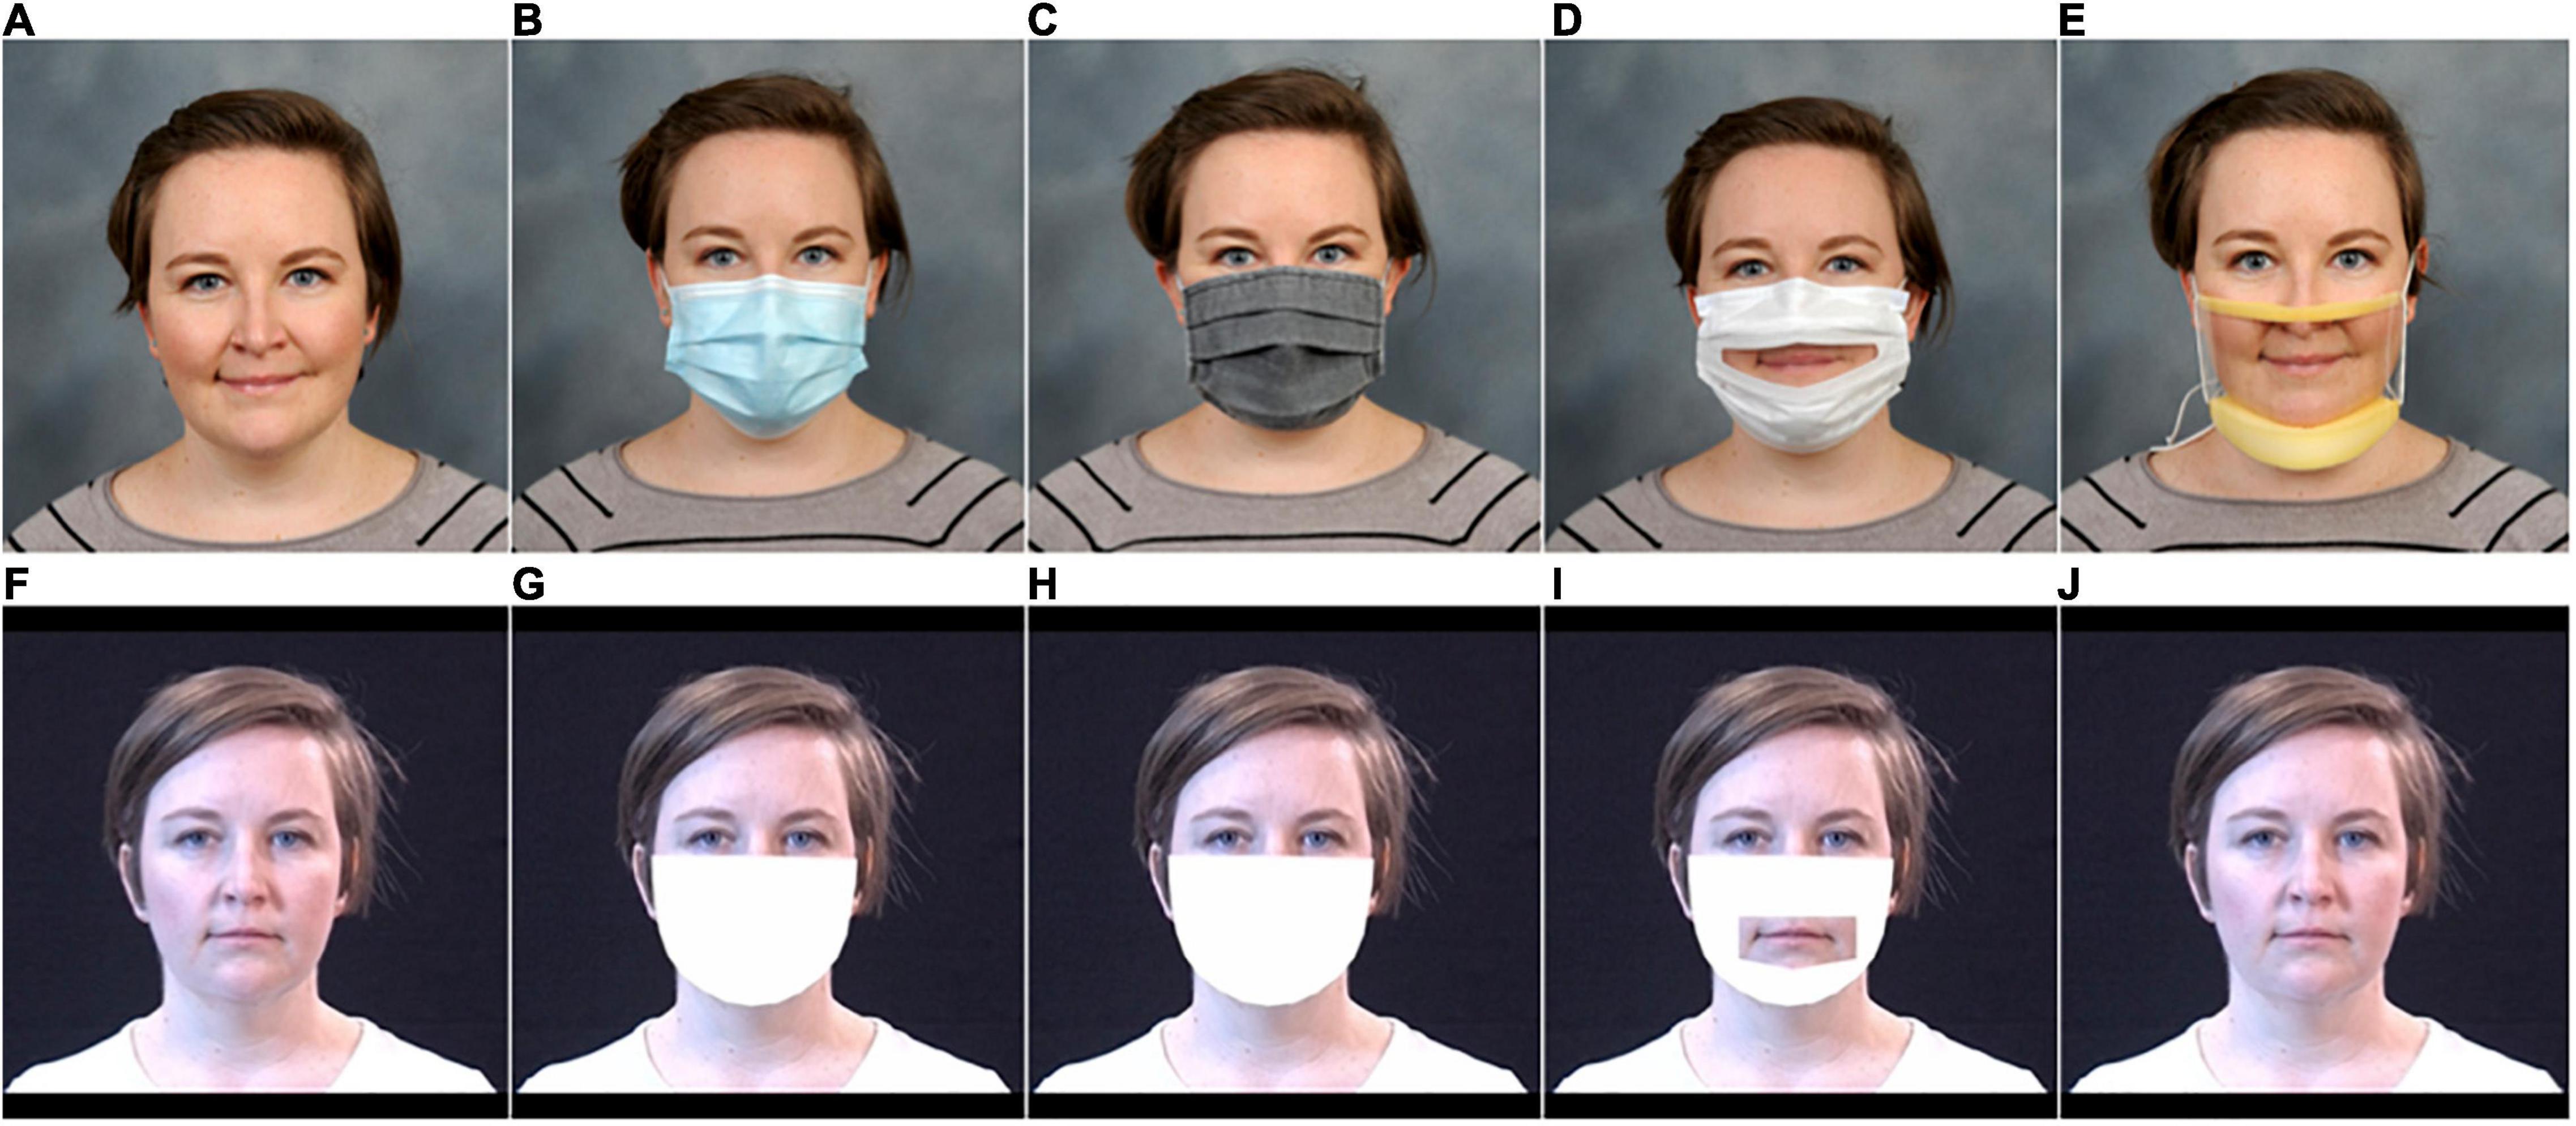 The effect of masks on cognitive performance